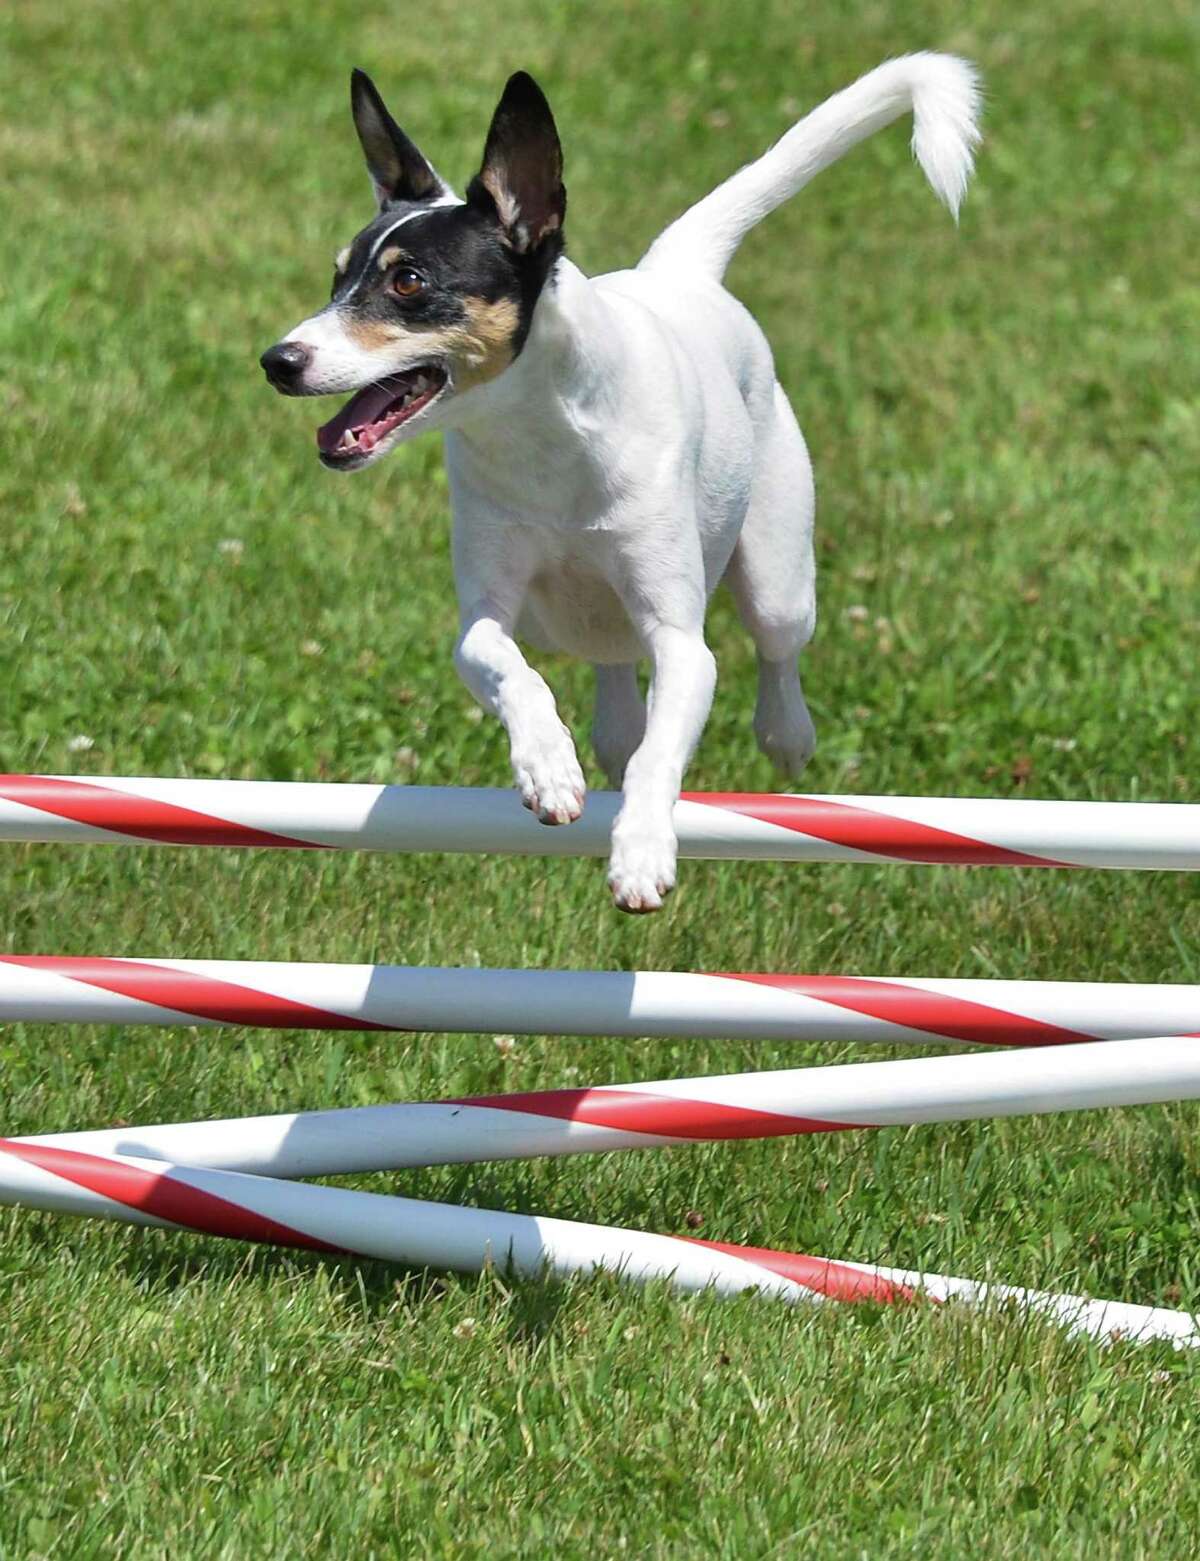 Brittany Keckler of Cincinnati, Ohio's Rat Terrier "Troy" practices for the Canine Performance Event's National Agility Championship at the Altamont Fairgrounds Thursday June 14, 2012. A first for Albany County, the three-day event beginning Friday at the fairgrounds will see 500 dogs of all shapes and sizes run an agility course combining jumps inspired by horse shows with obstacles derived from traditional working dog training. (John Carl D'Annibale / Times Union)